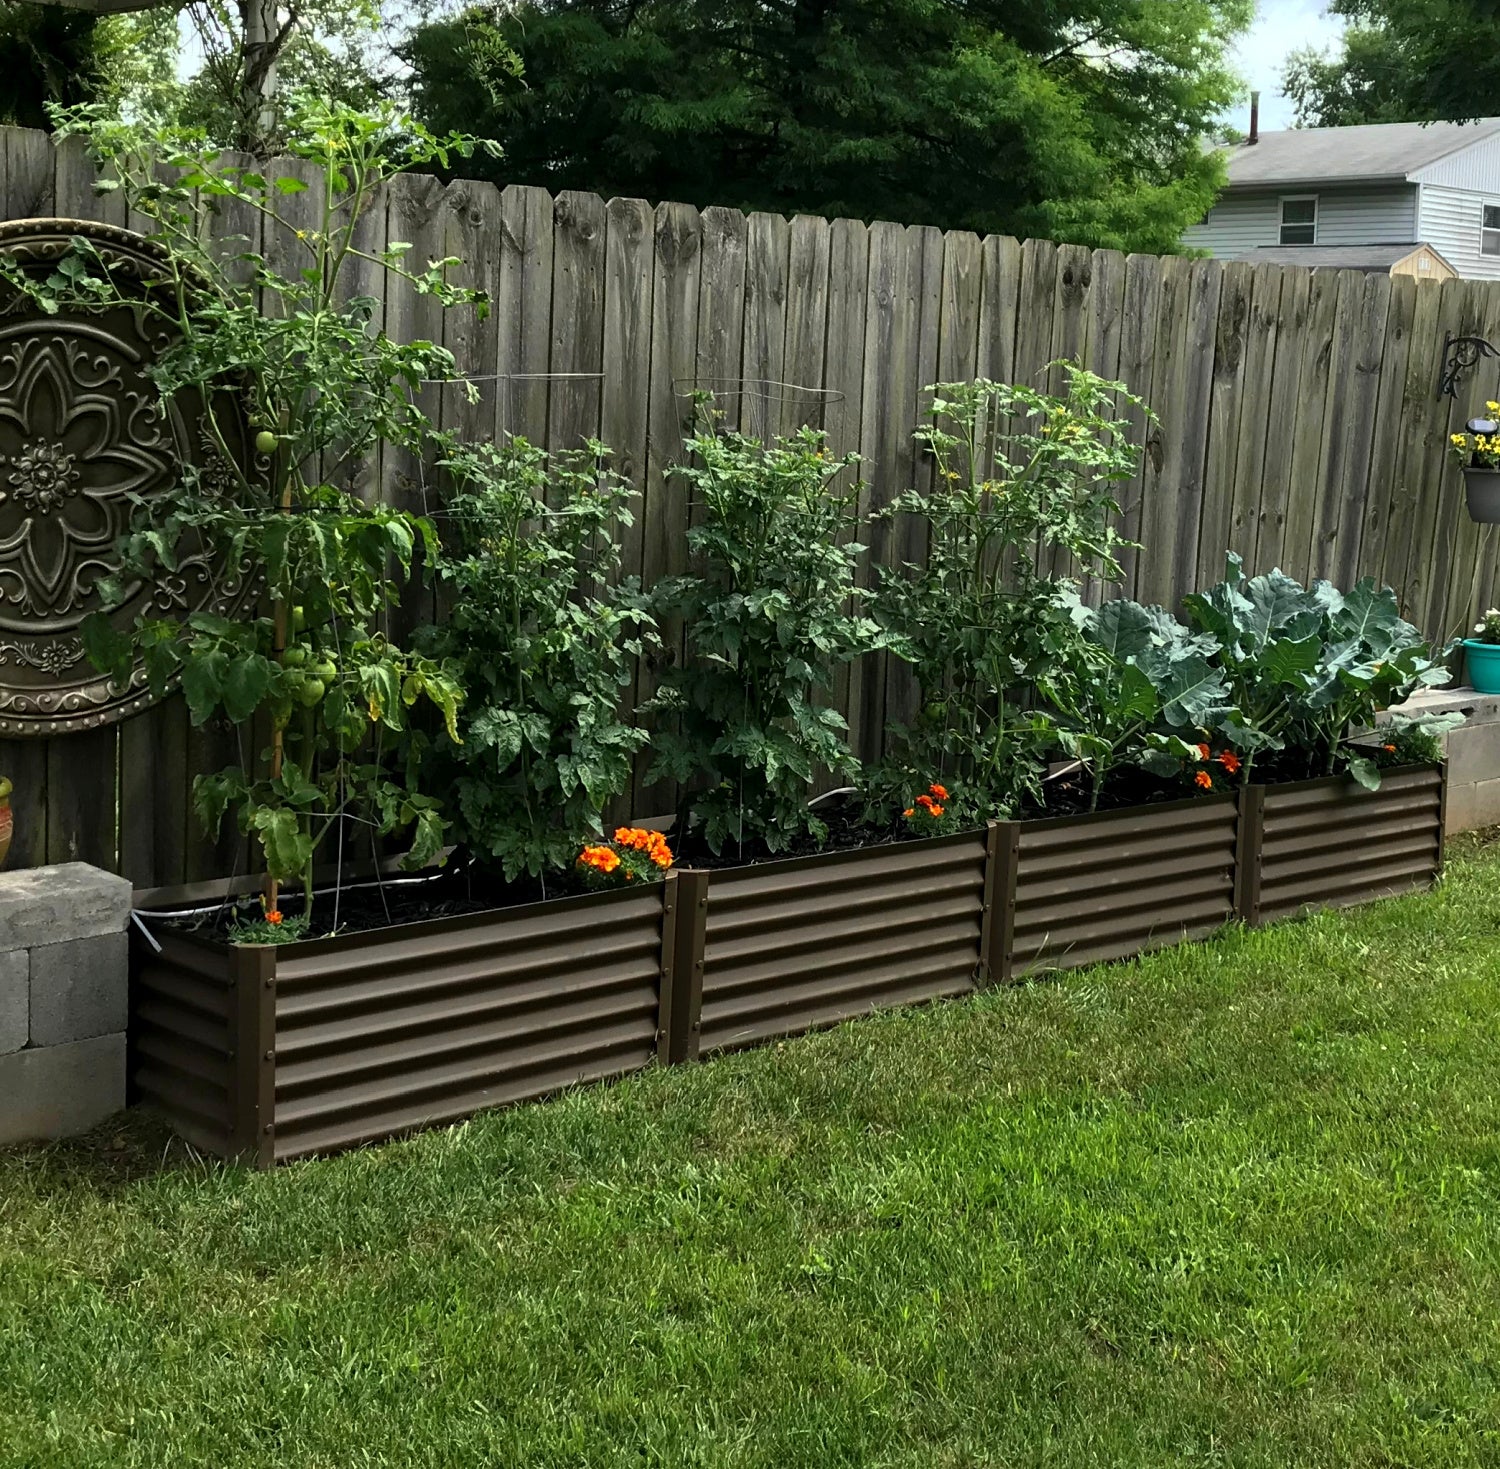 narrow rustic fresa raised garden bed in backyard along fence line with tomatoes and kohlrabi